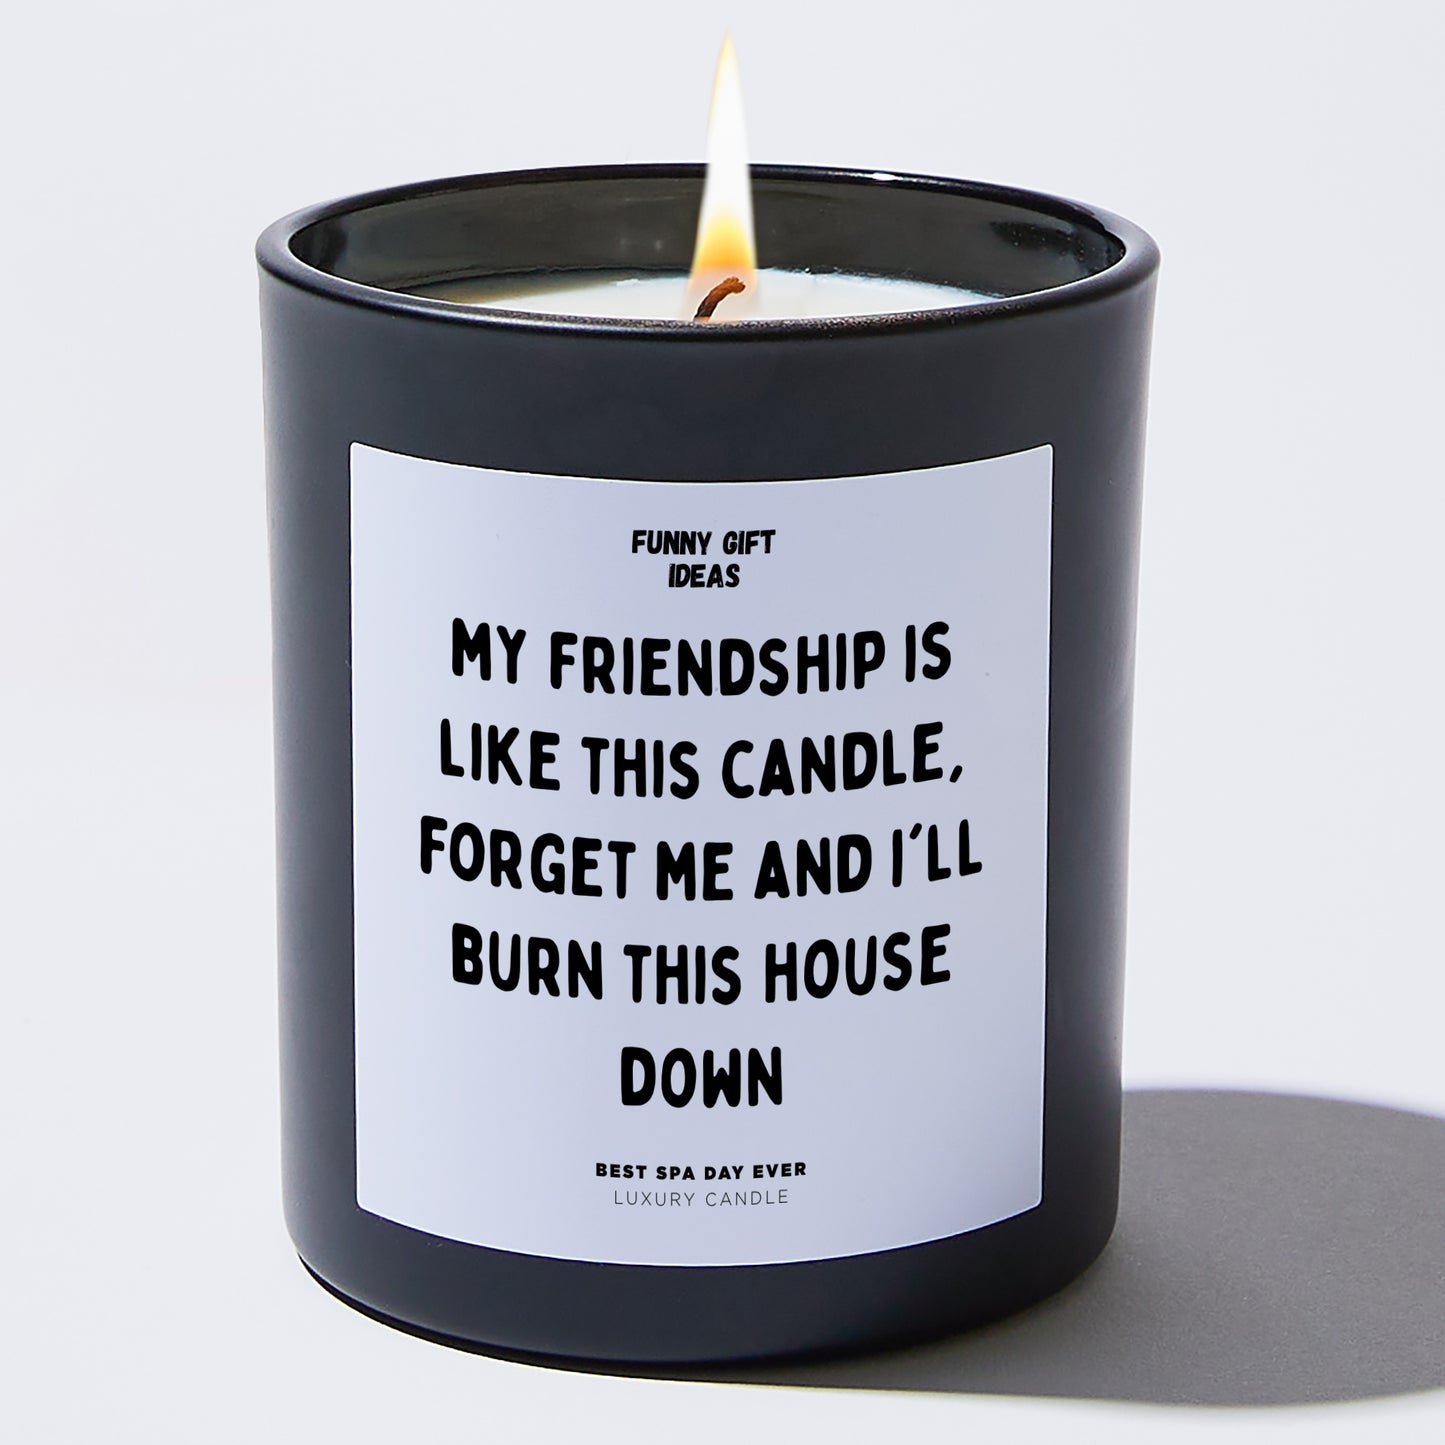 Fun Gift for Friends - My Friendship Is Like This Candle! Forget Me And I'll Burn This House Down - Candle